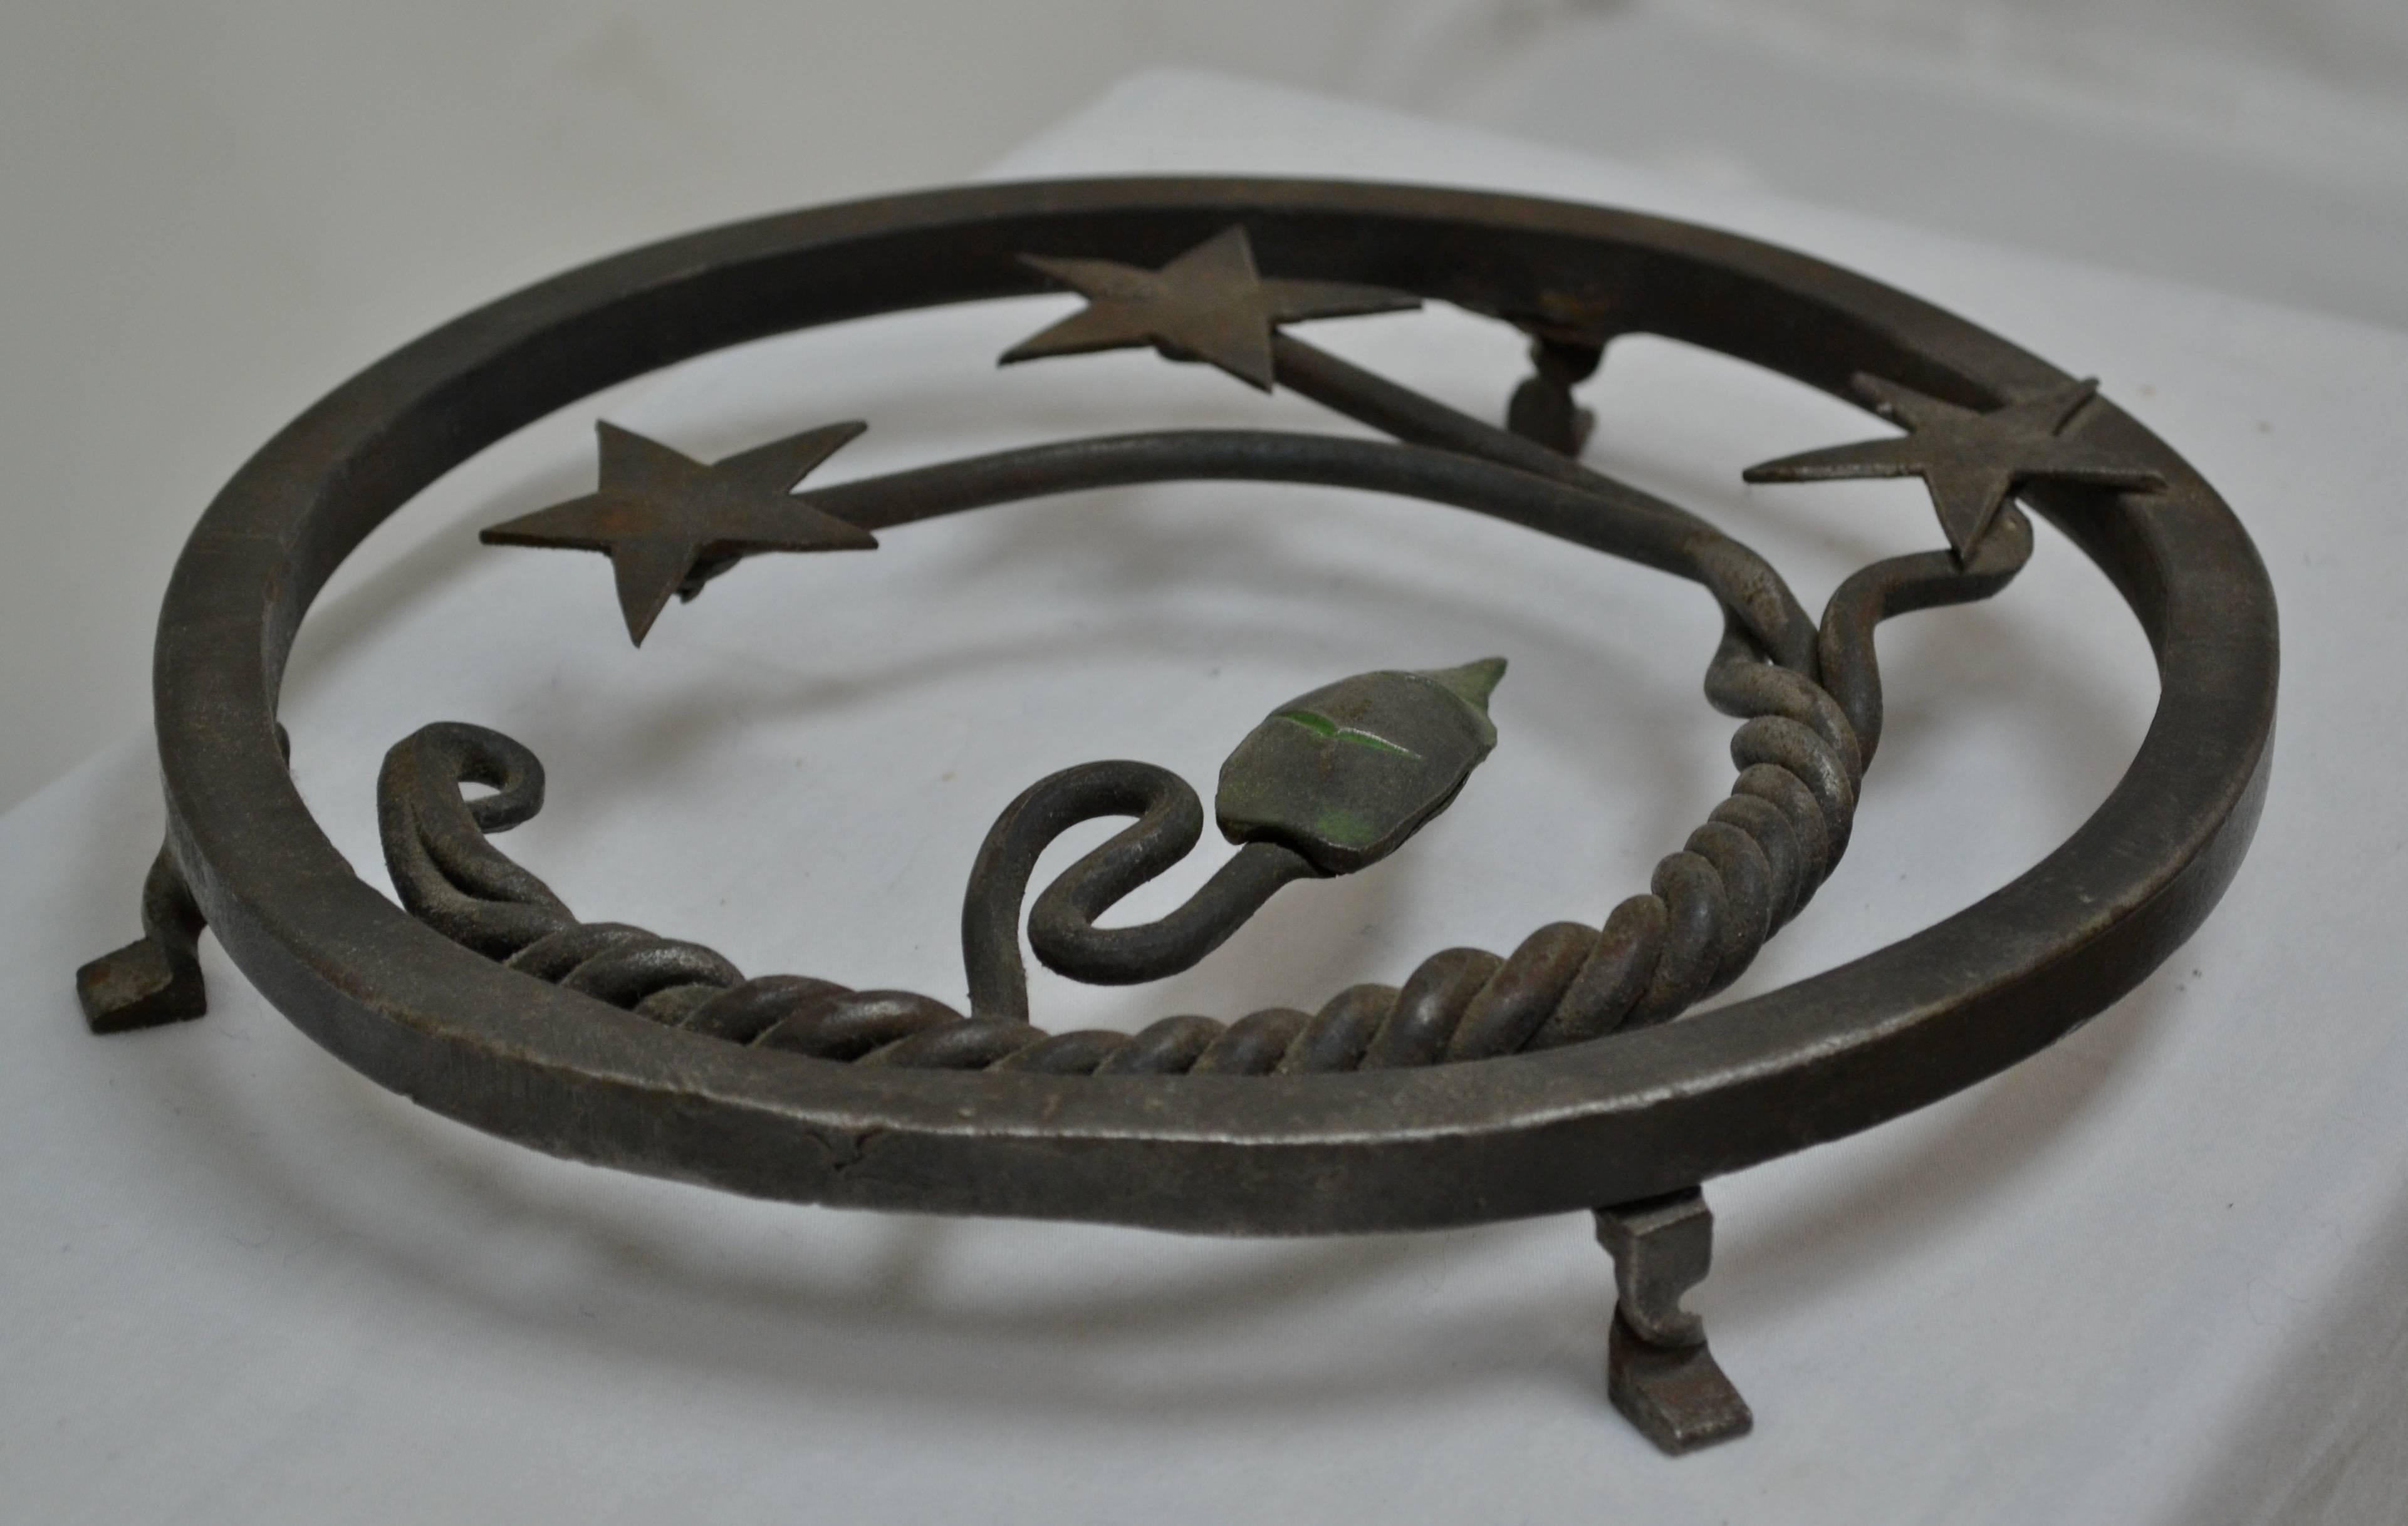 This is a small but beautiful example of the blacksmith's art. This hand-forged iron trivet features a three strand rope twist with stars, and a leaf with a hint of green, within a 0.5